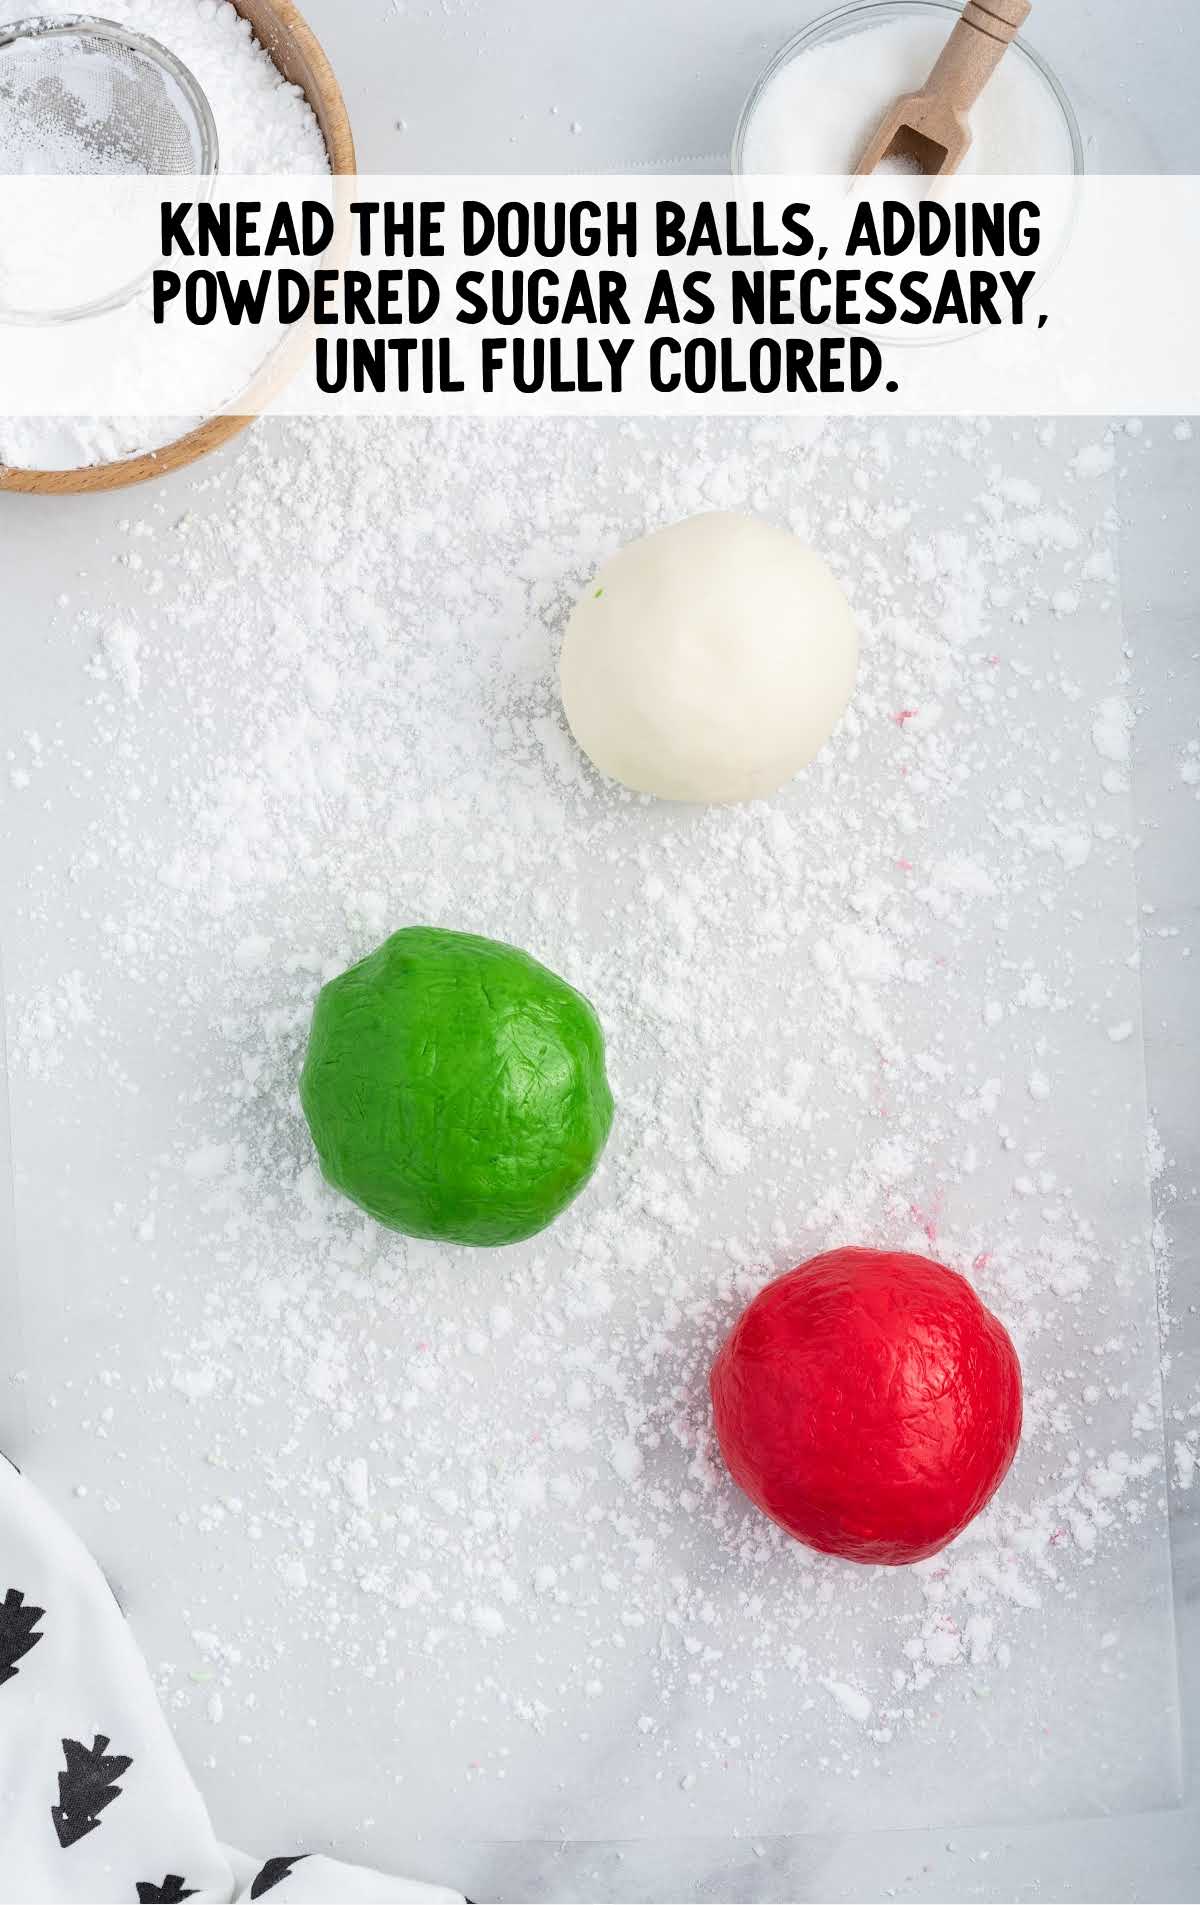 add powdered sugar to the dough ball until colored